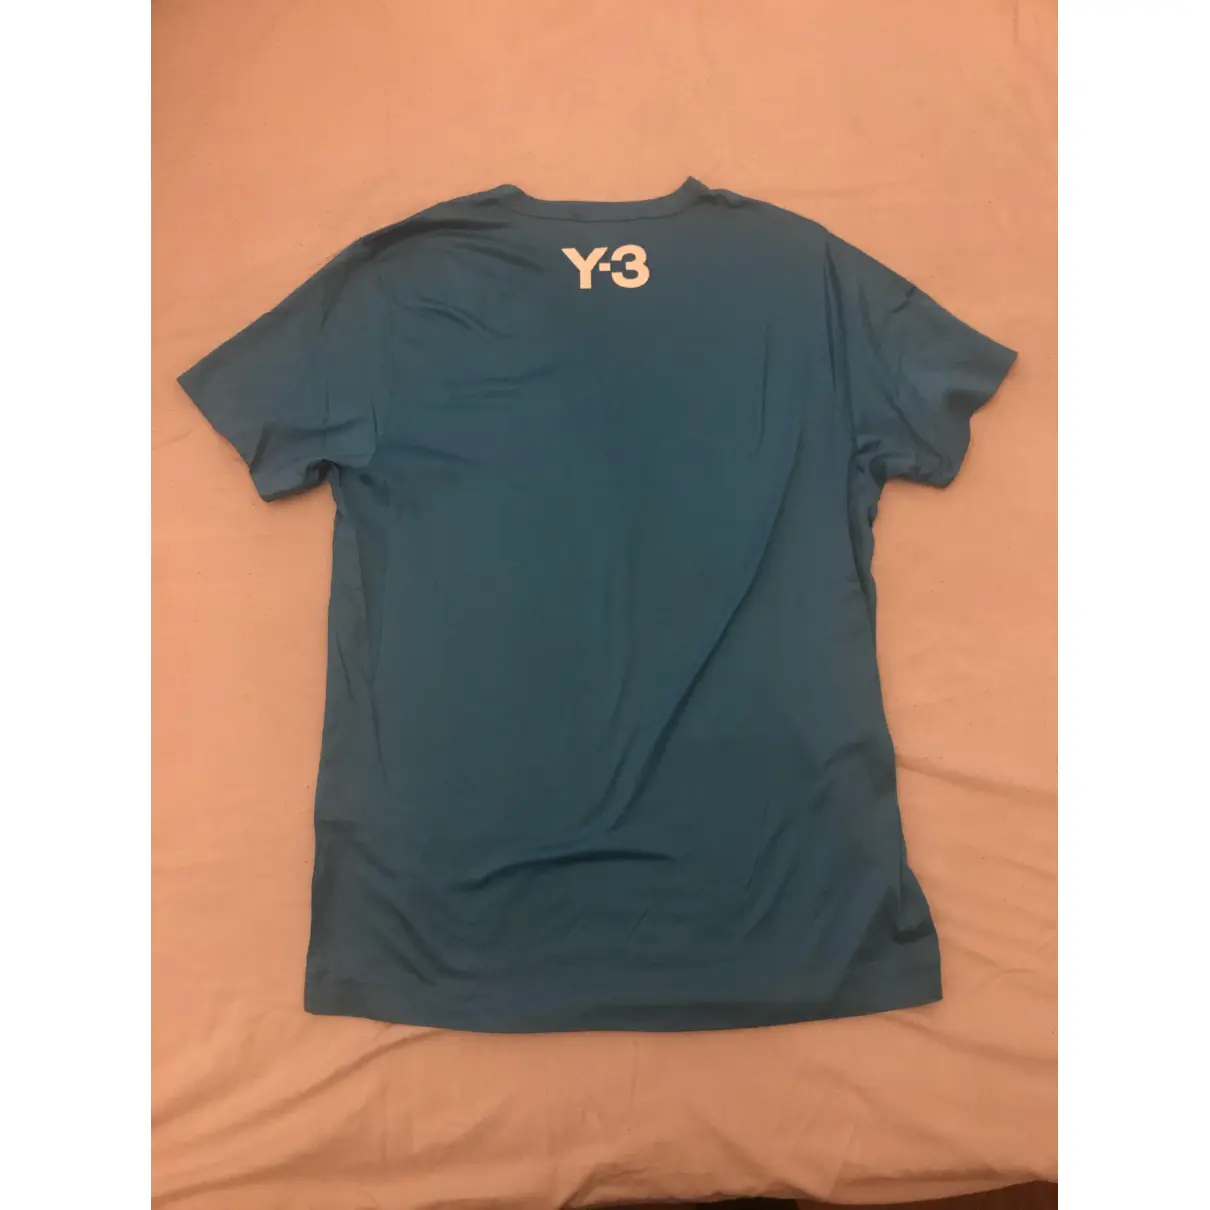 Buy Y-3 Turquoise Cotton T-shirt online